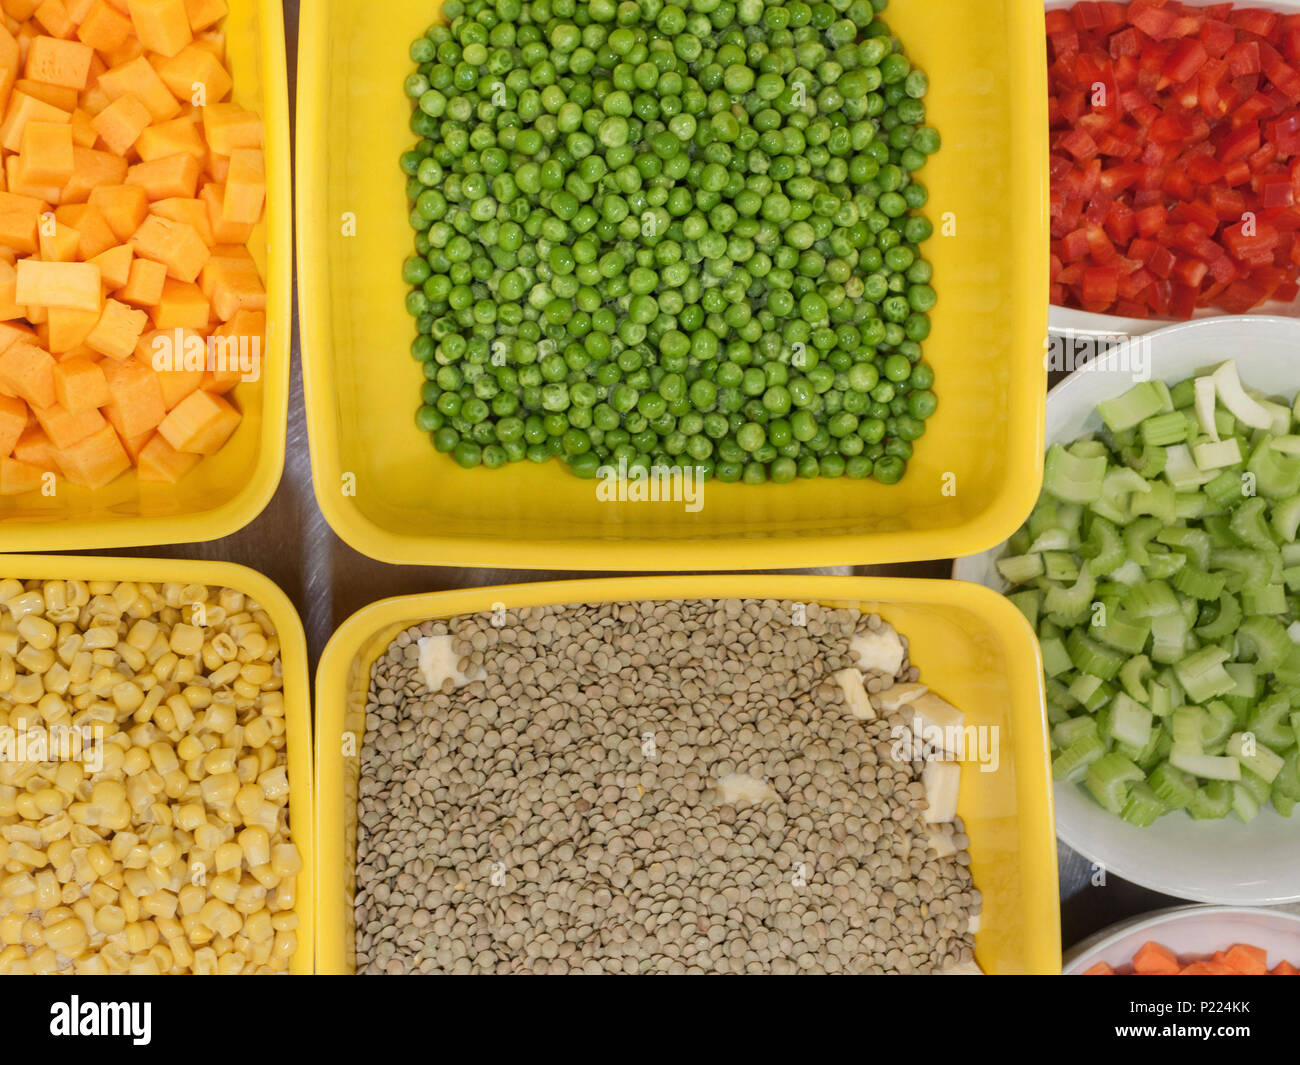 Bowls of fresh and diced vegetables. Stock Photo